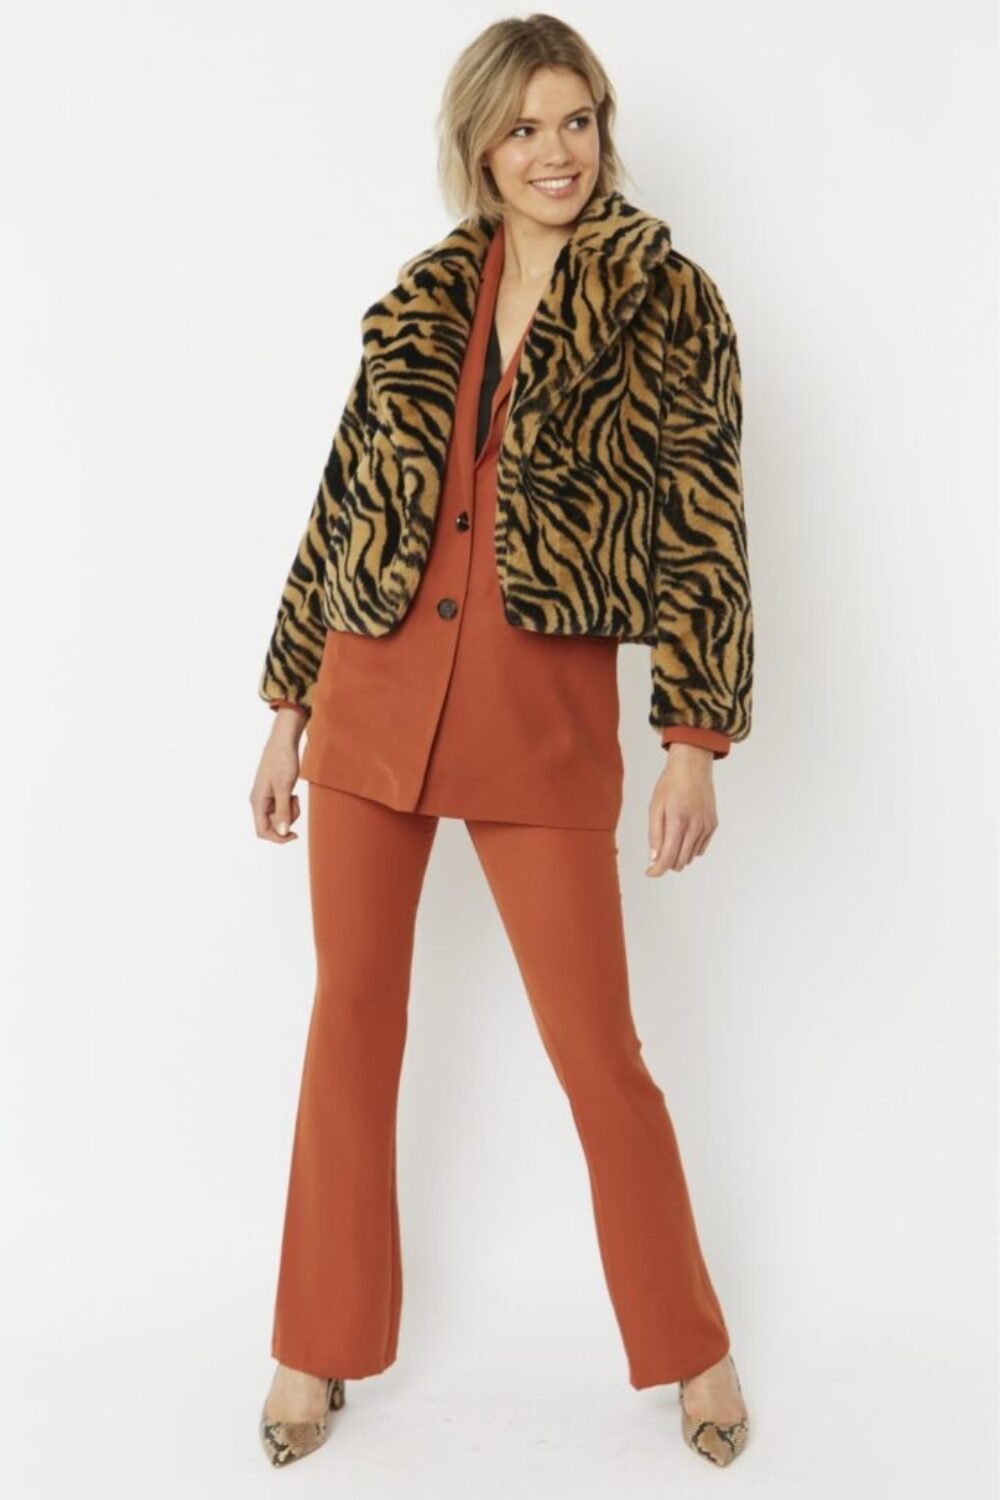 Shop Lux Animal Print Faux Fur Cropped Coat and women's luxury and designer clothes at www.lux-apparel.co.uk